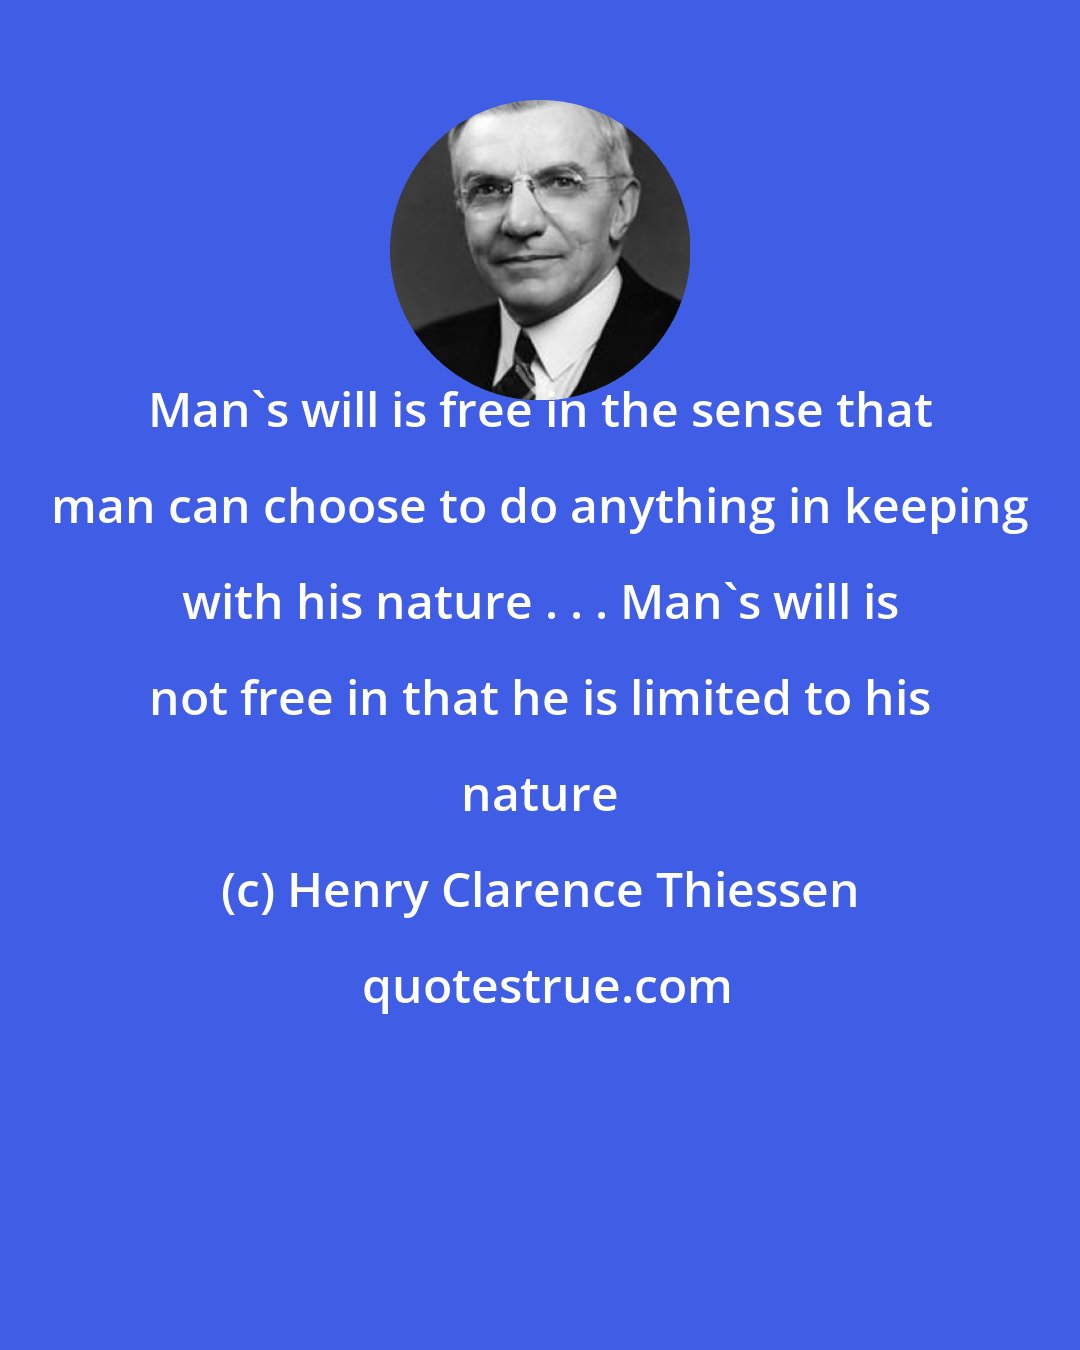 Henry Clarence Thiessen: Man's will is free in the sense that man can choose to do anything in keeping with his nature . . . Man's will is not free in that he is limited to his nature